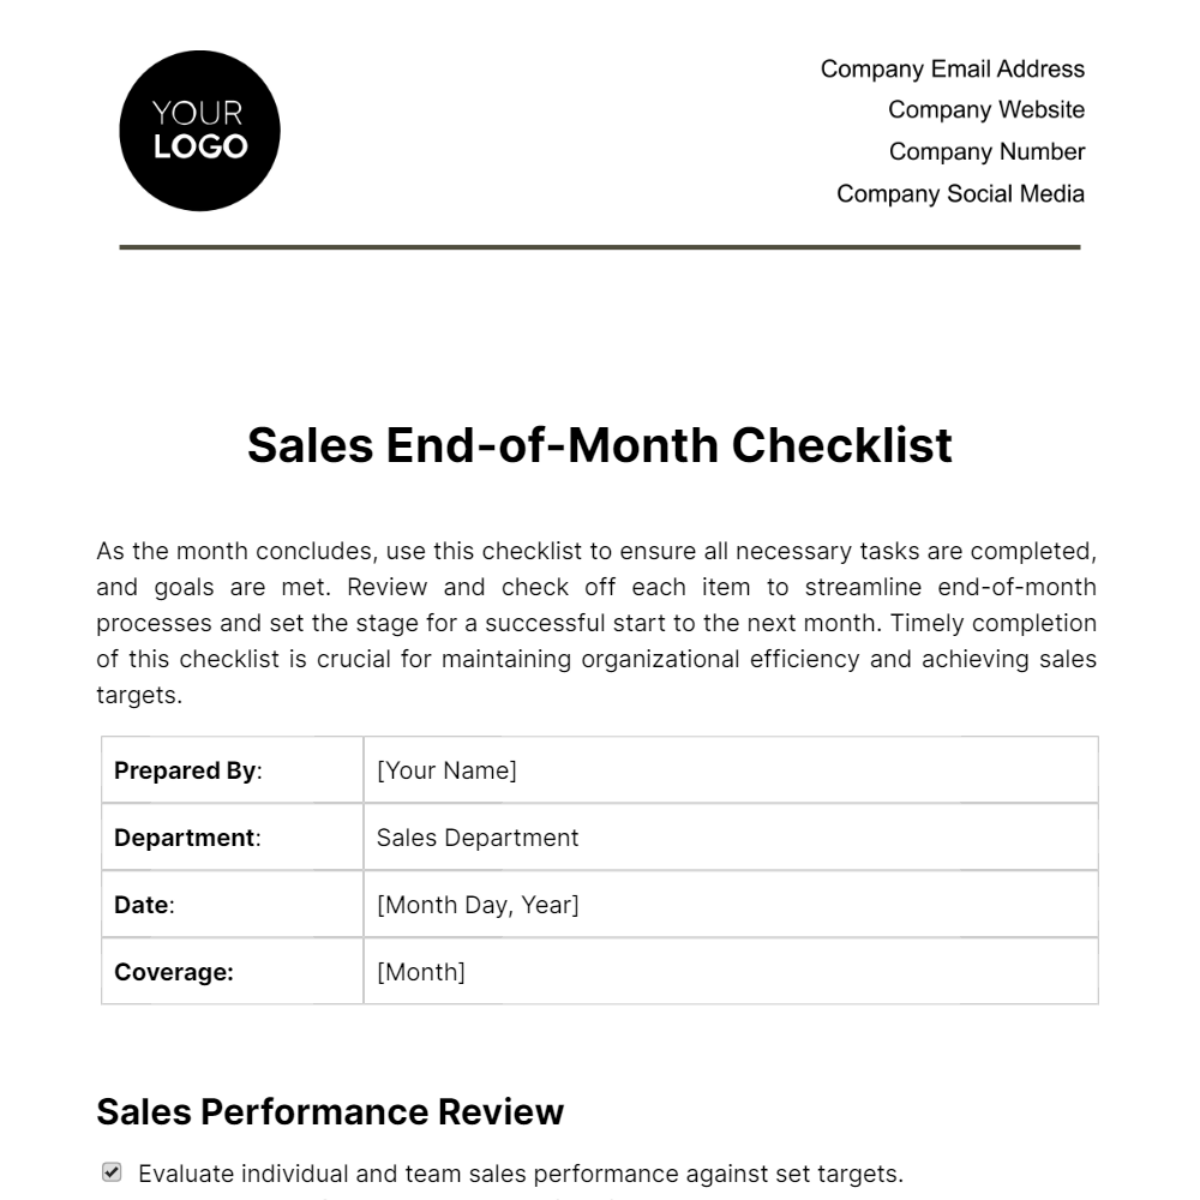 Sales End-of-Month Checklist Template